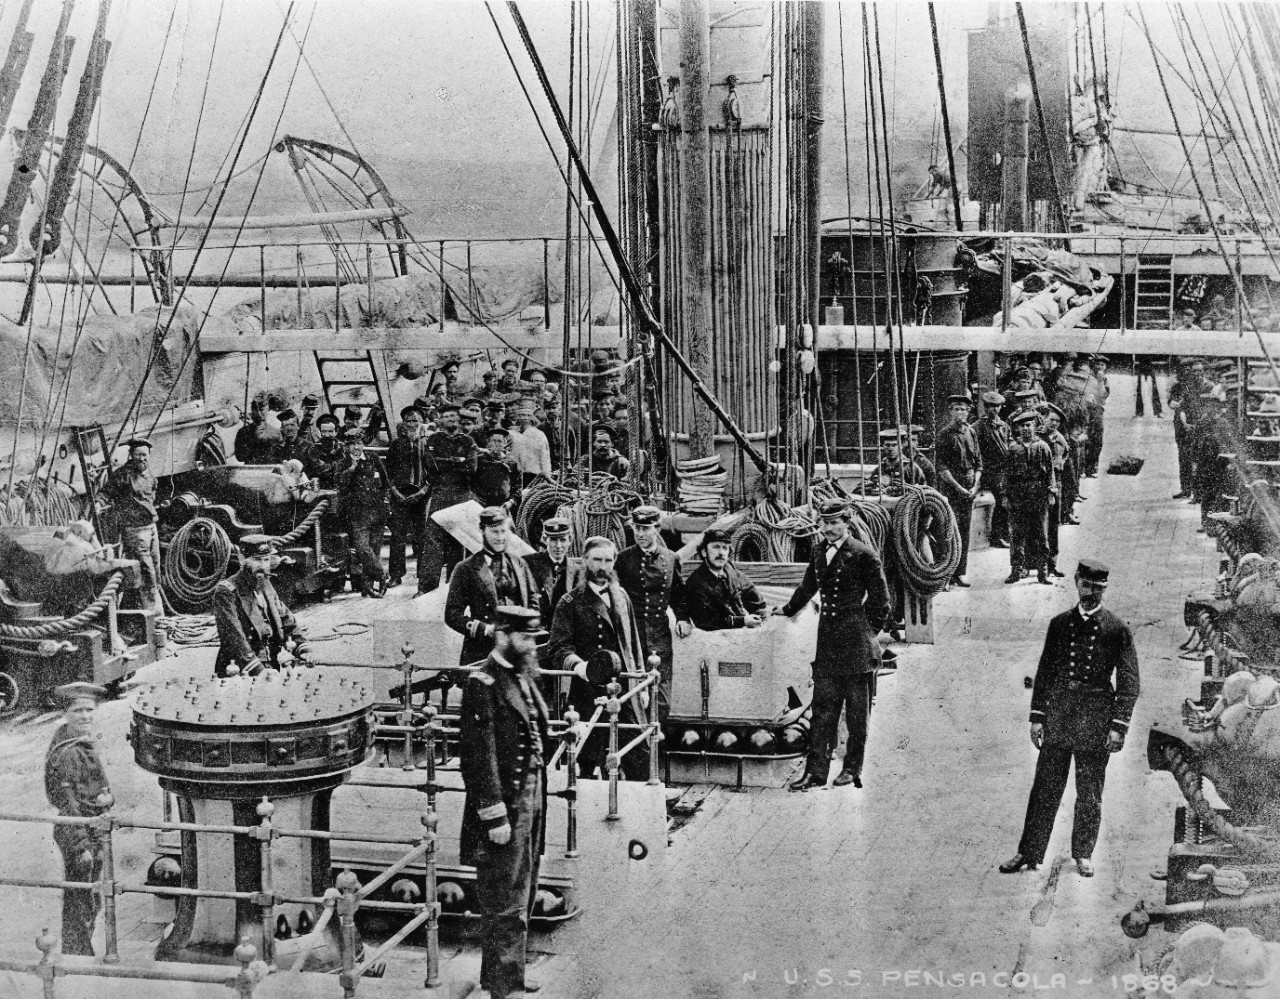 1 photograph of officers and crew of USS Pensacola, circa 1868. 1 book “The United States Navy from the Revolution to Date” by Francis J. Reynolds, transferred to Navy Department Library.